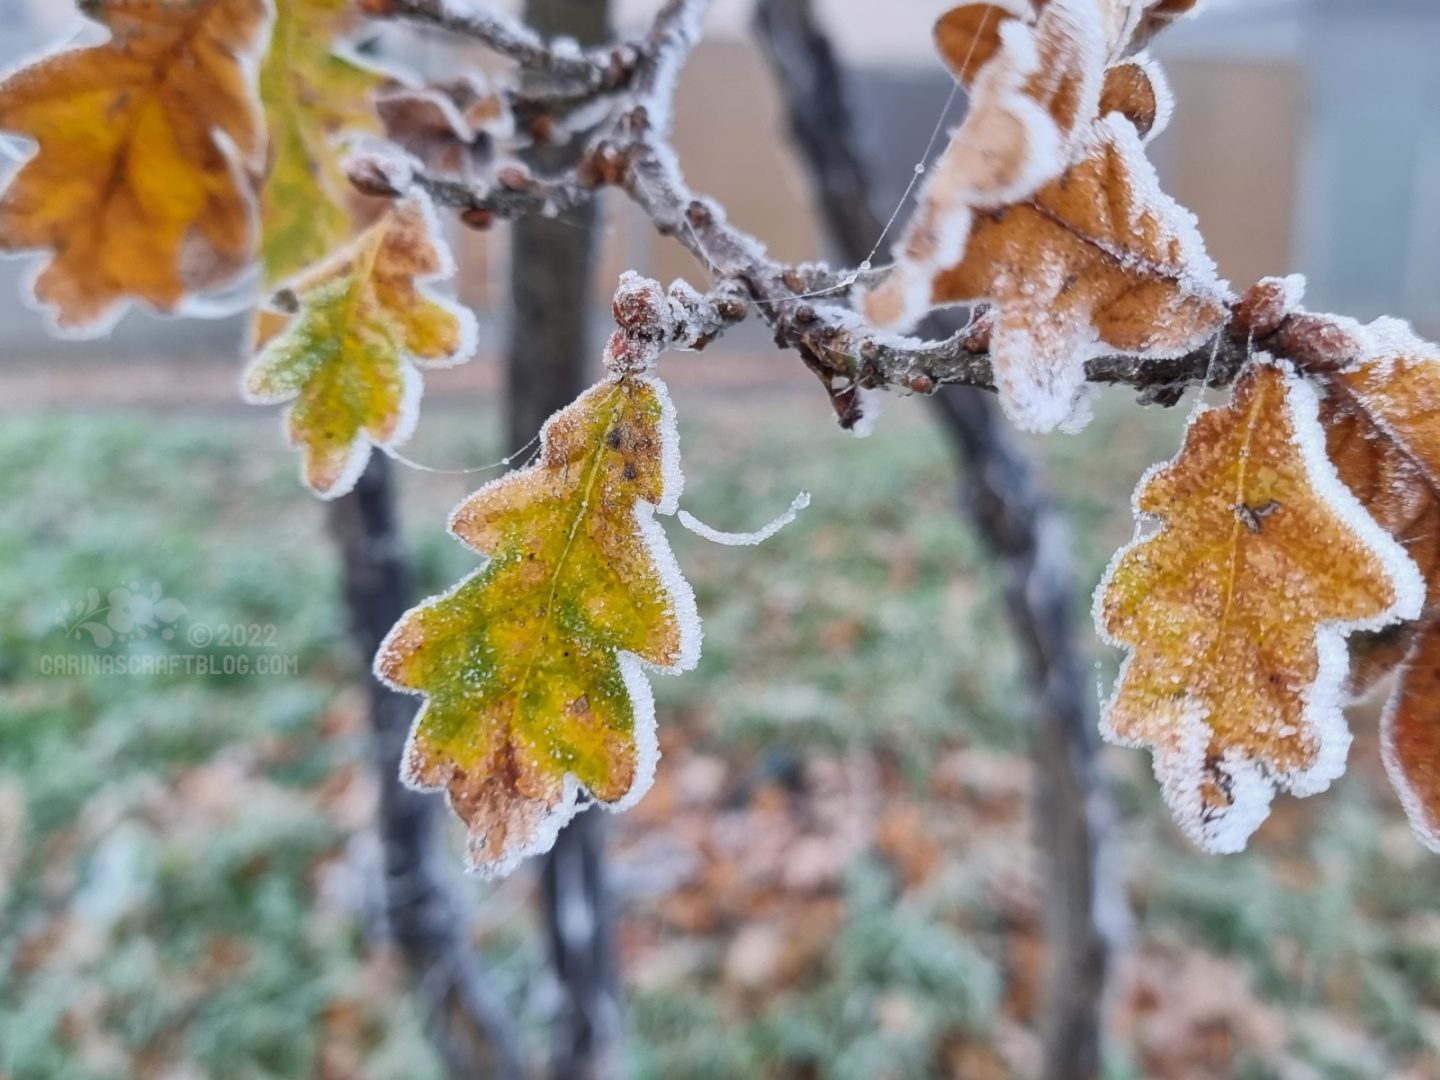 Mottled green and orange oak leaves edged with frost.